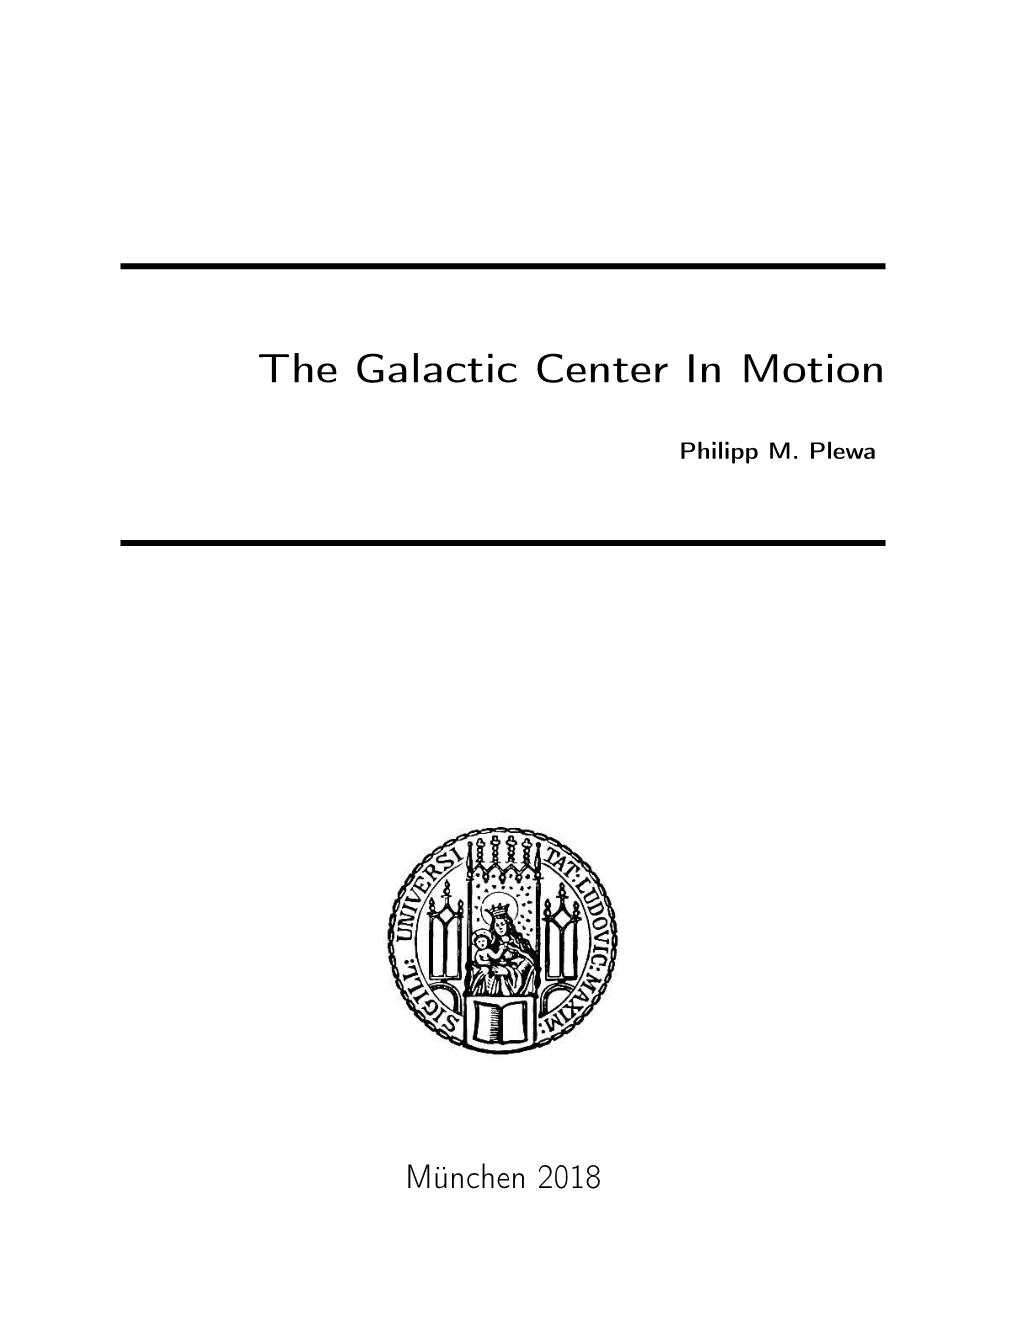 The Galactic Center in Motion